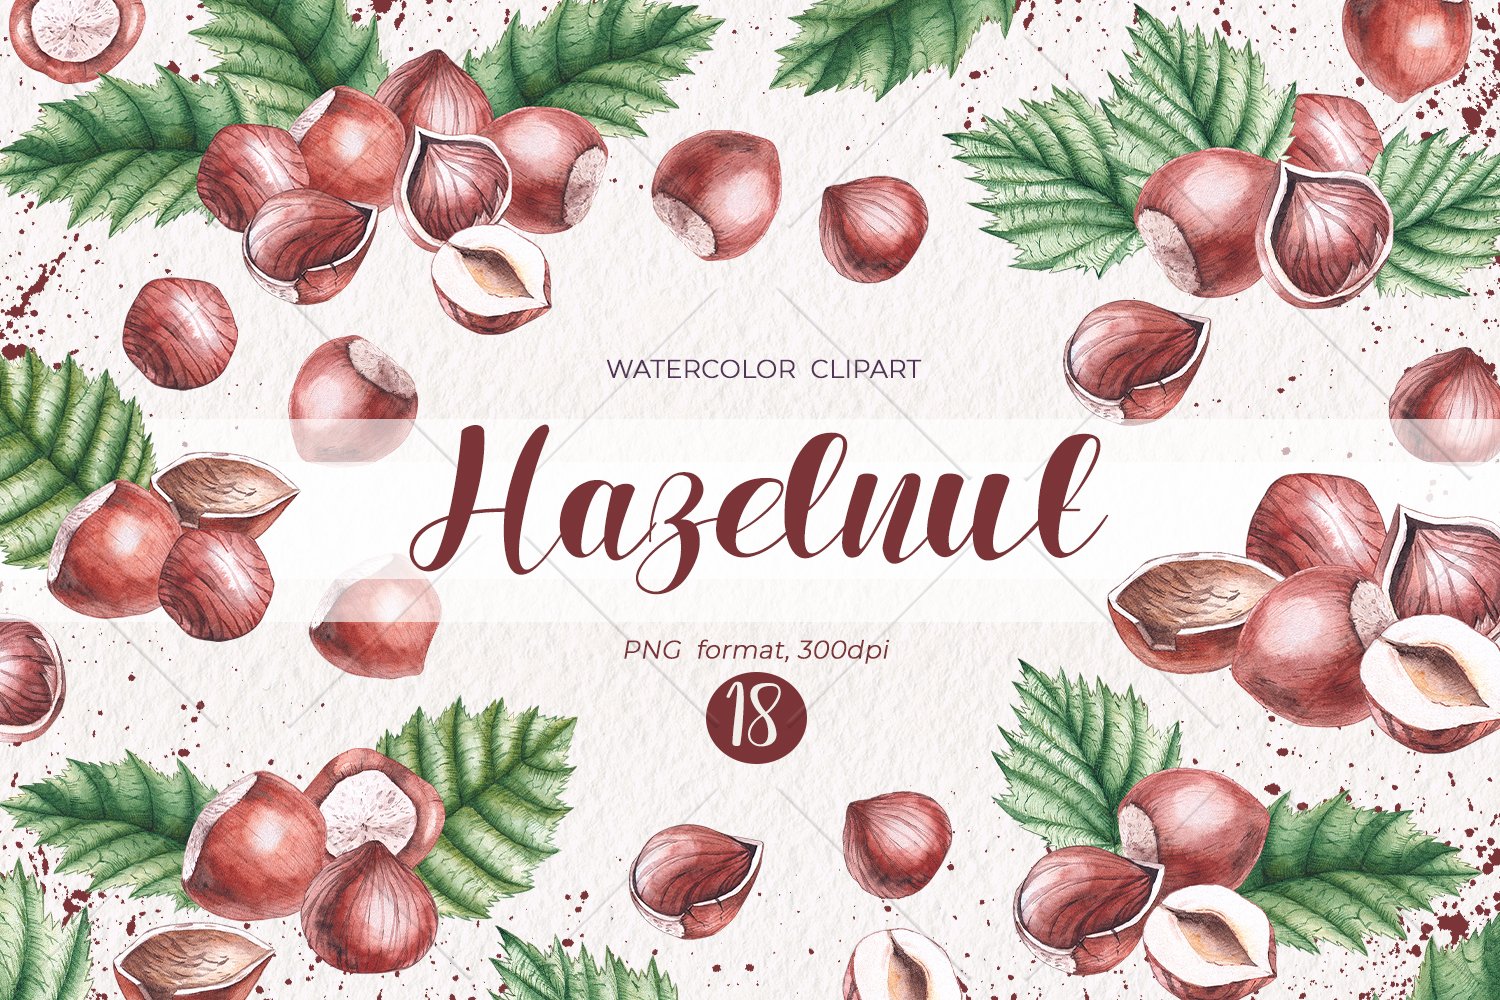 Brown lettering "Hazelnut" and a set of different hazelnuts with leaves on a gray background.